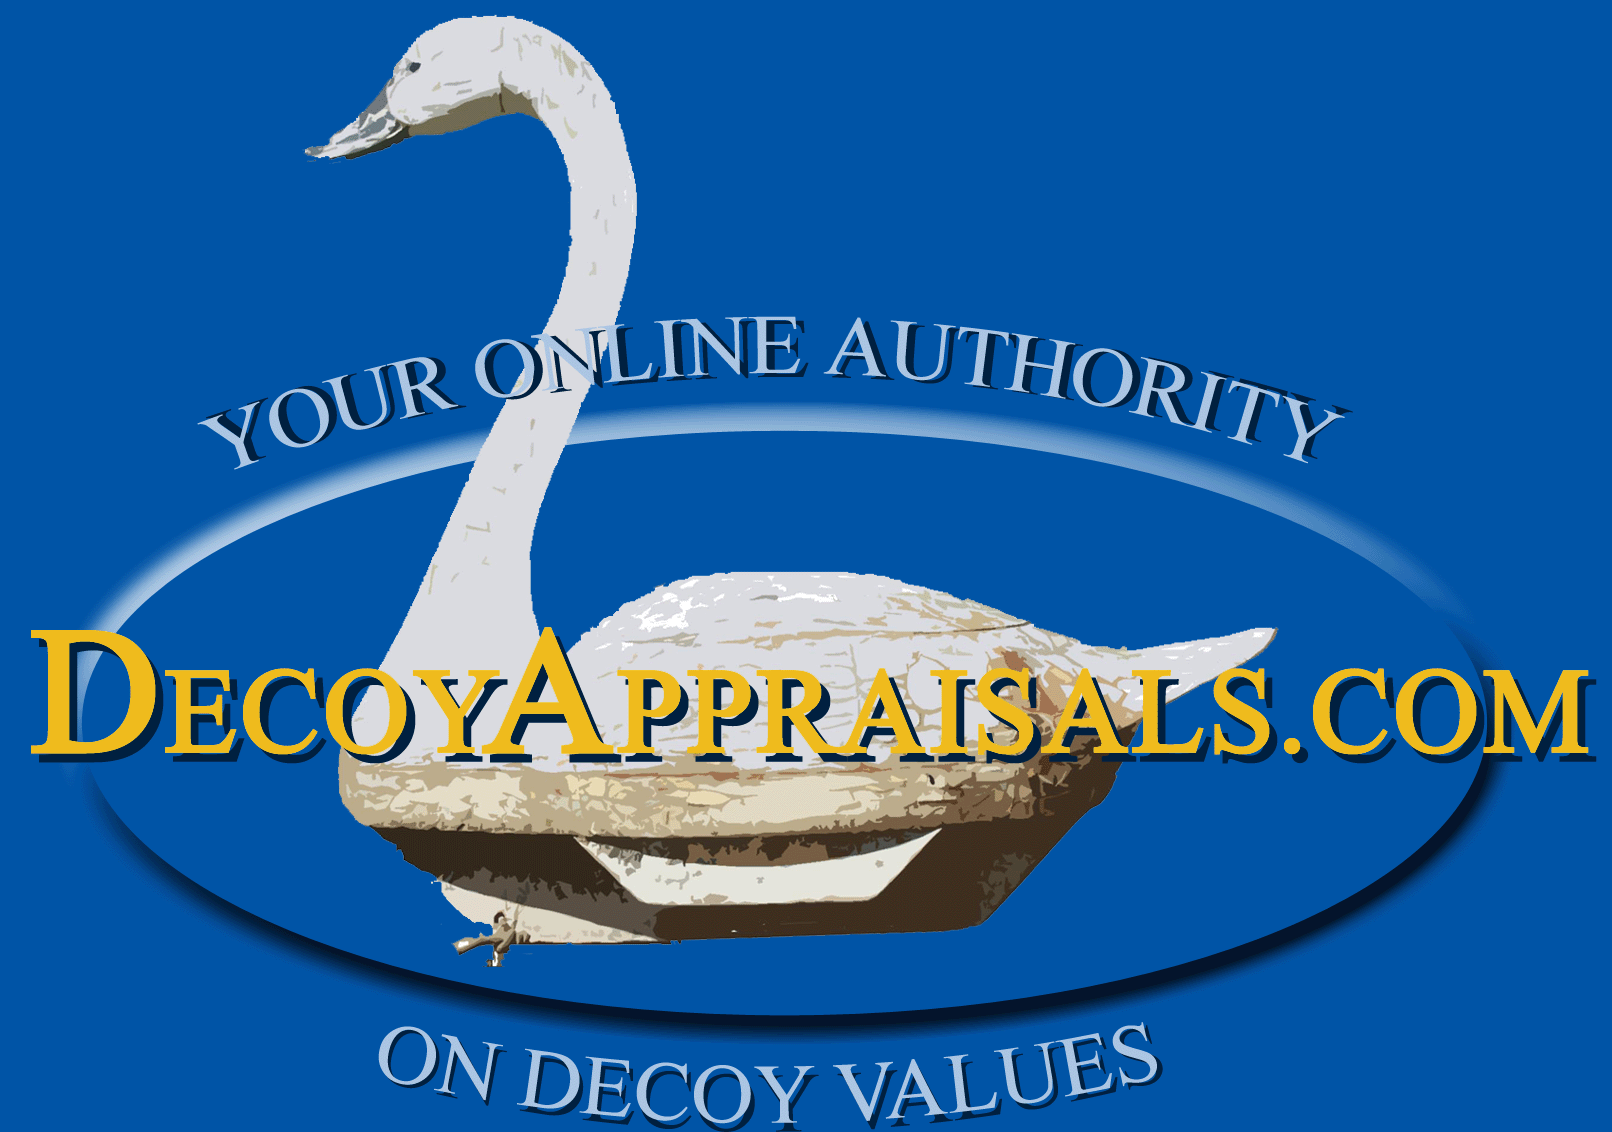 we can appraise and sell you decoy or decoys